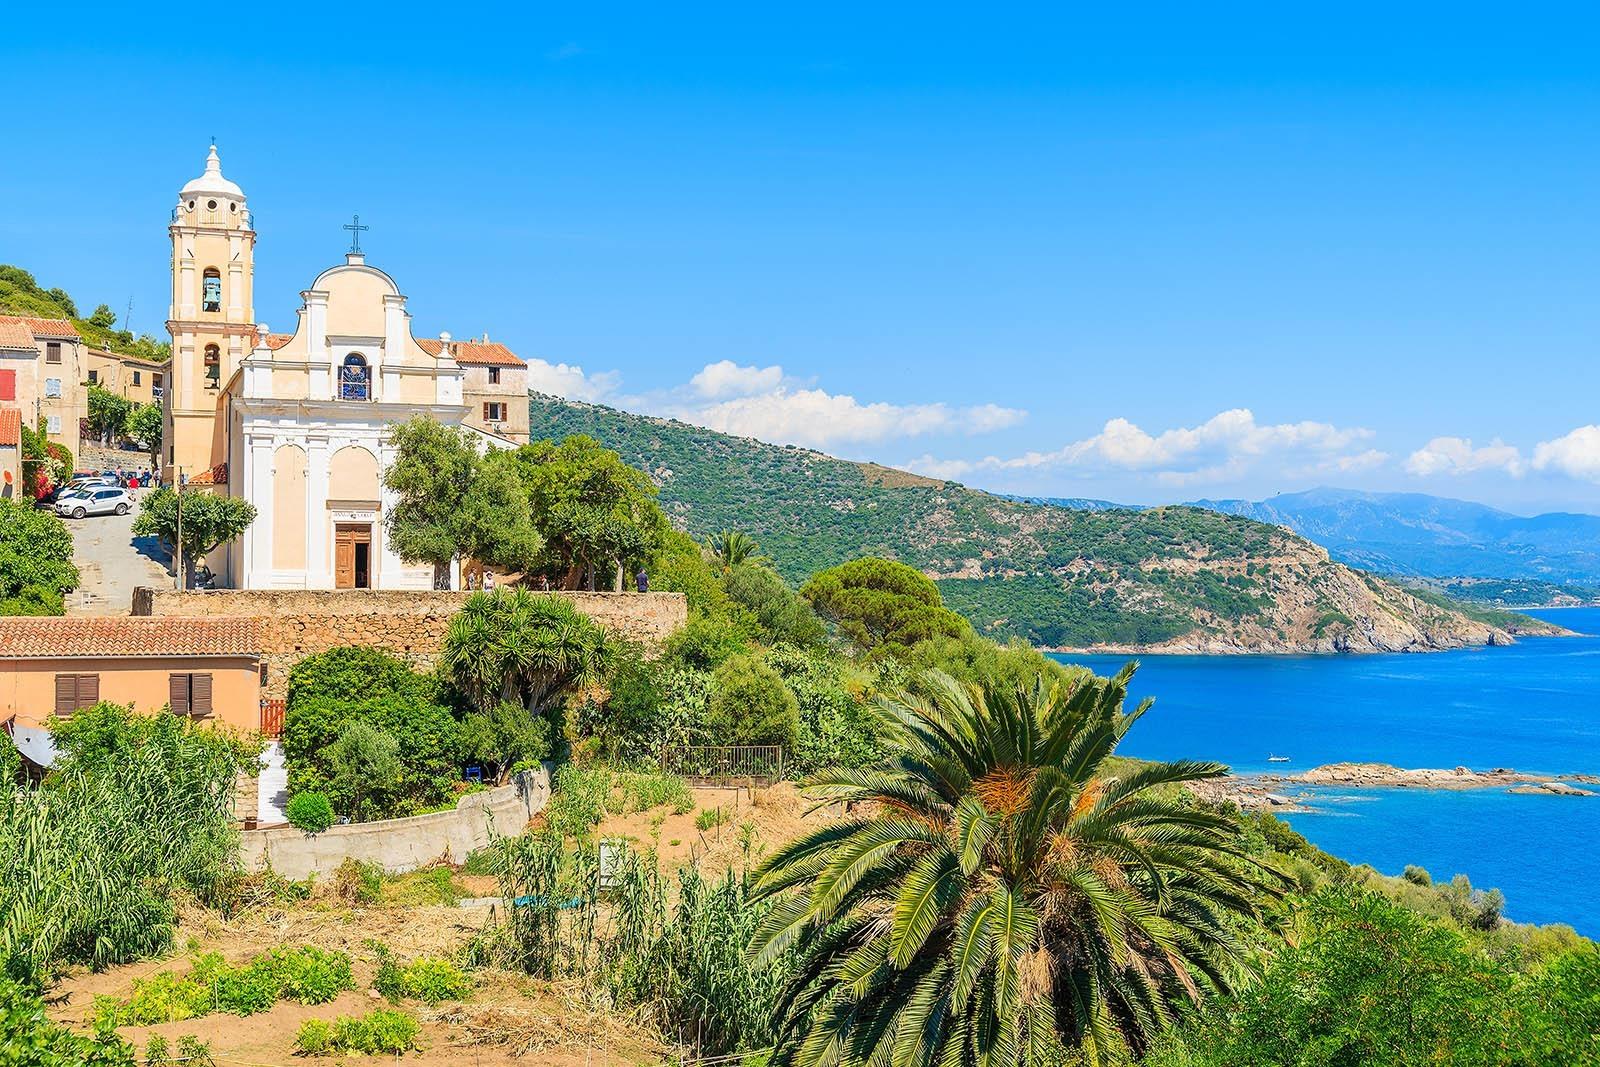 The 24 x most beautiful highlights Corsica: see & do?